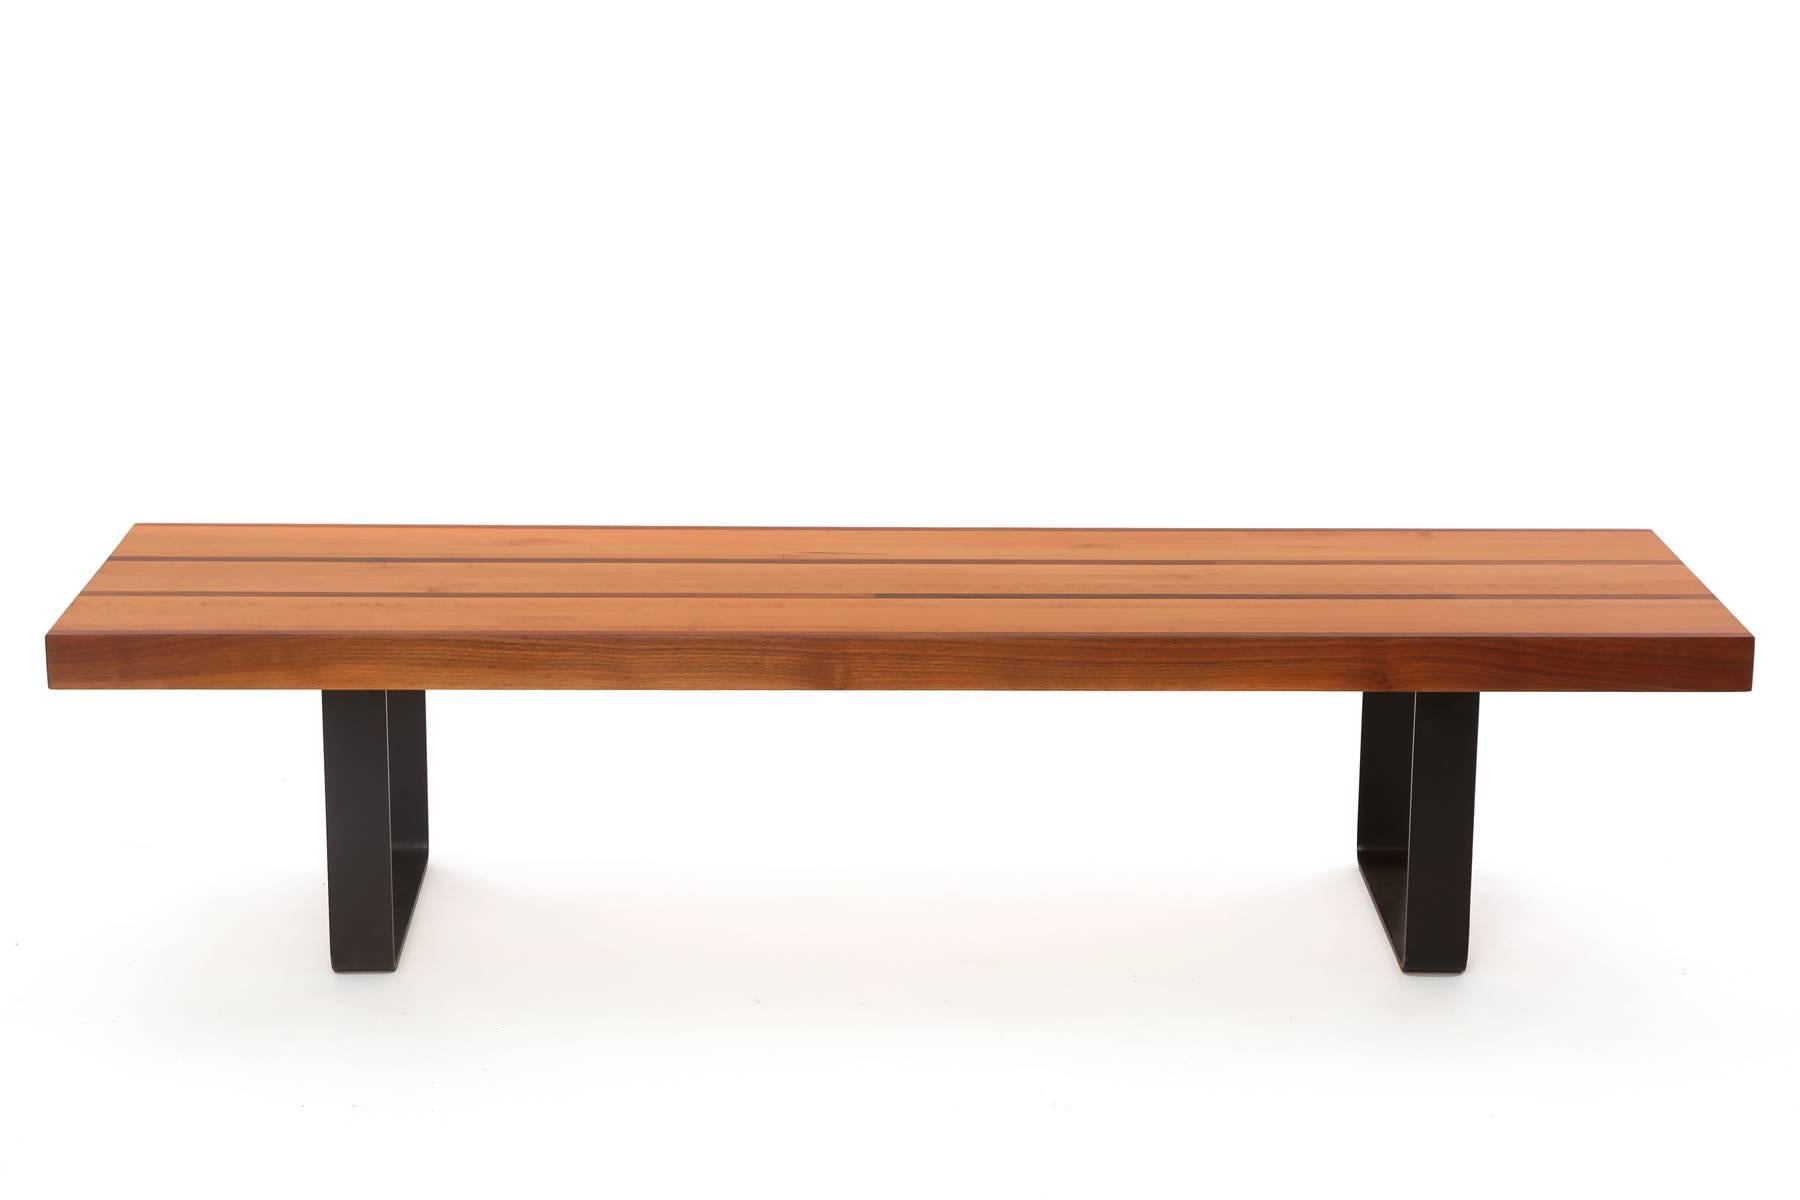 Custom 1950s walnut maple and iron bench or cocktail table, circa late 1950s. This unusual example has a solid maple top with inset walnut strips. The base is solid iron. The top has been recently impeccably refinished.